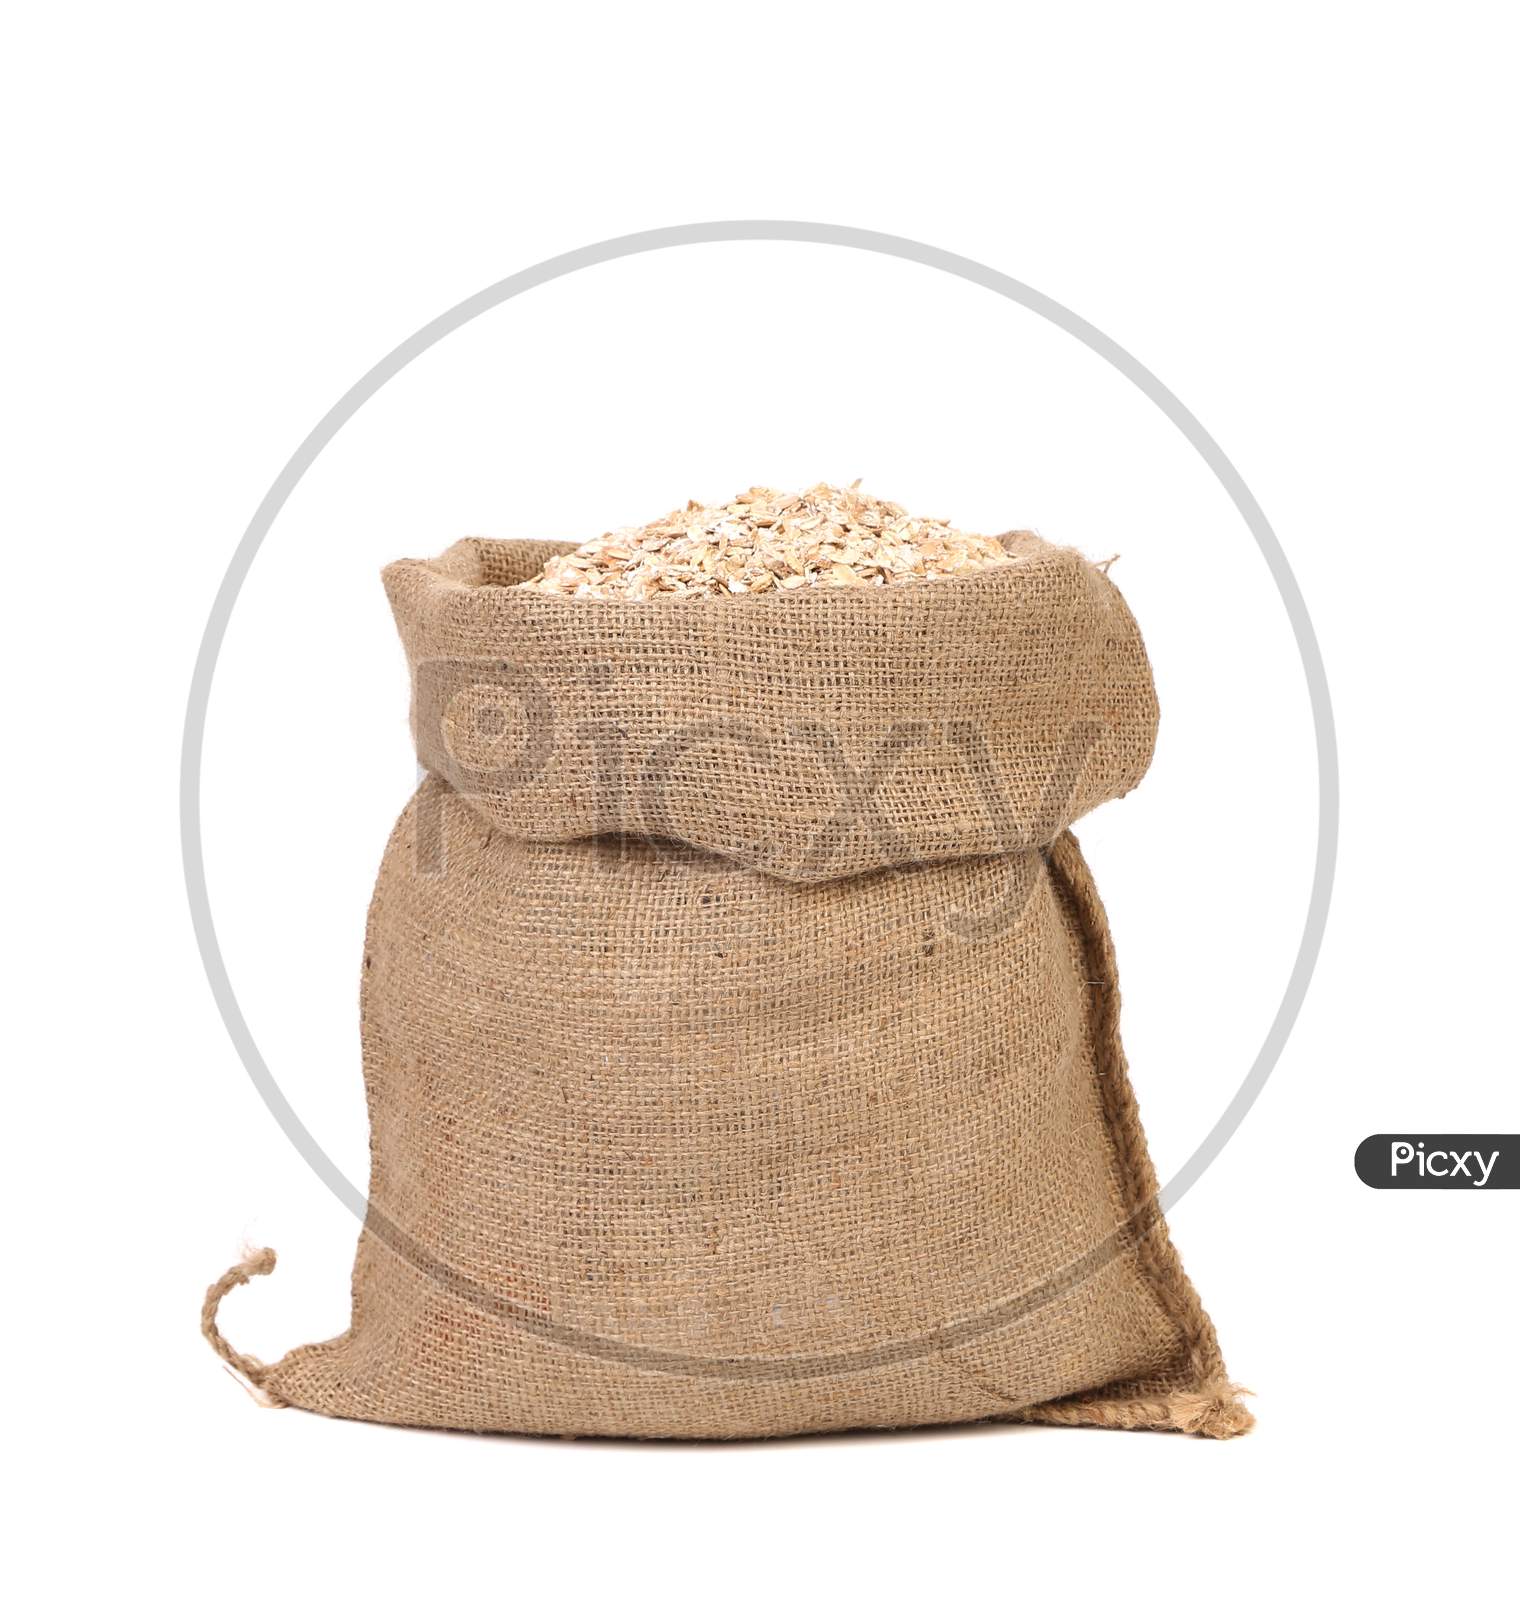 Bag Of Oatmeal Flakes. Close Up. Isolated On A White Background.